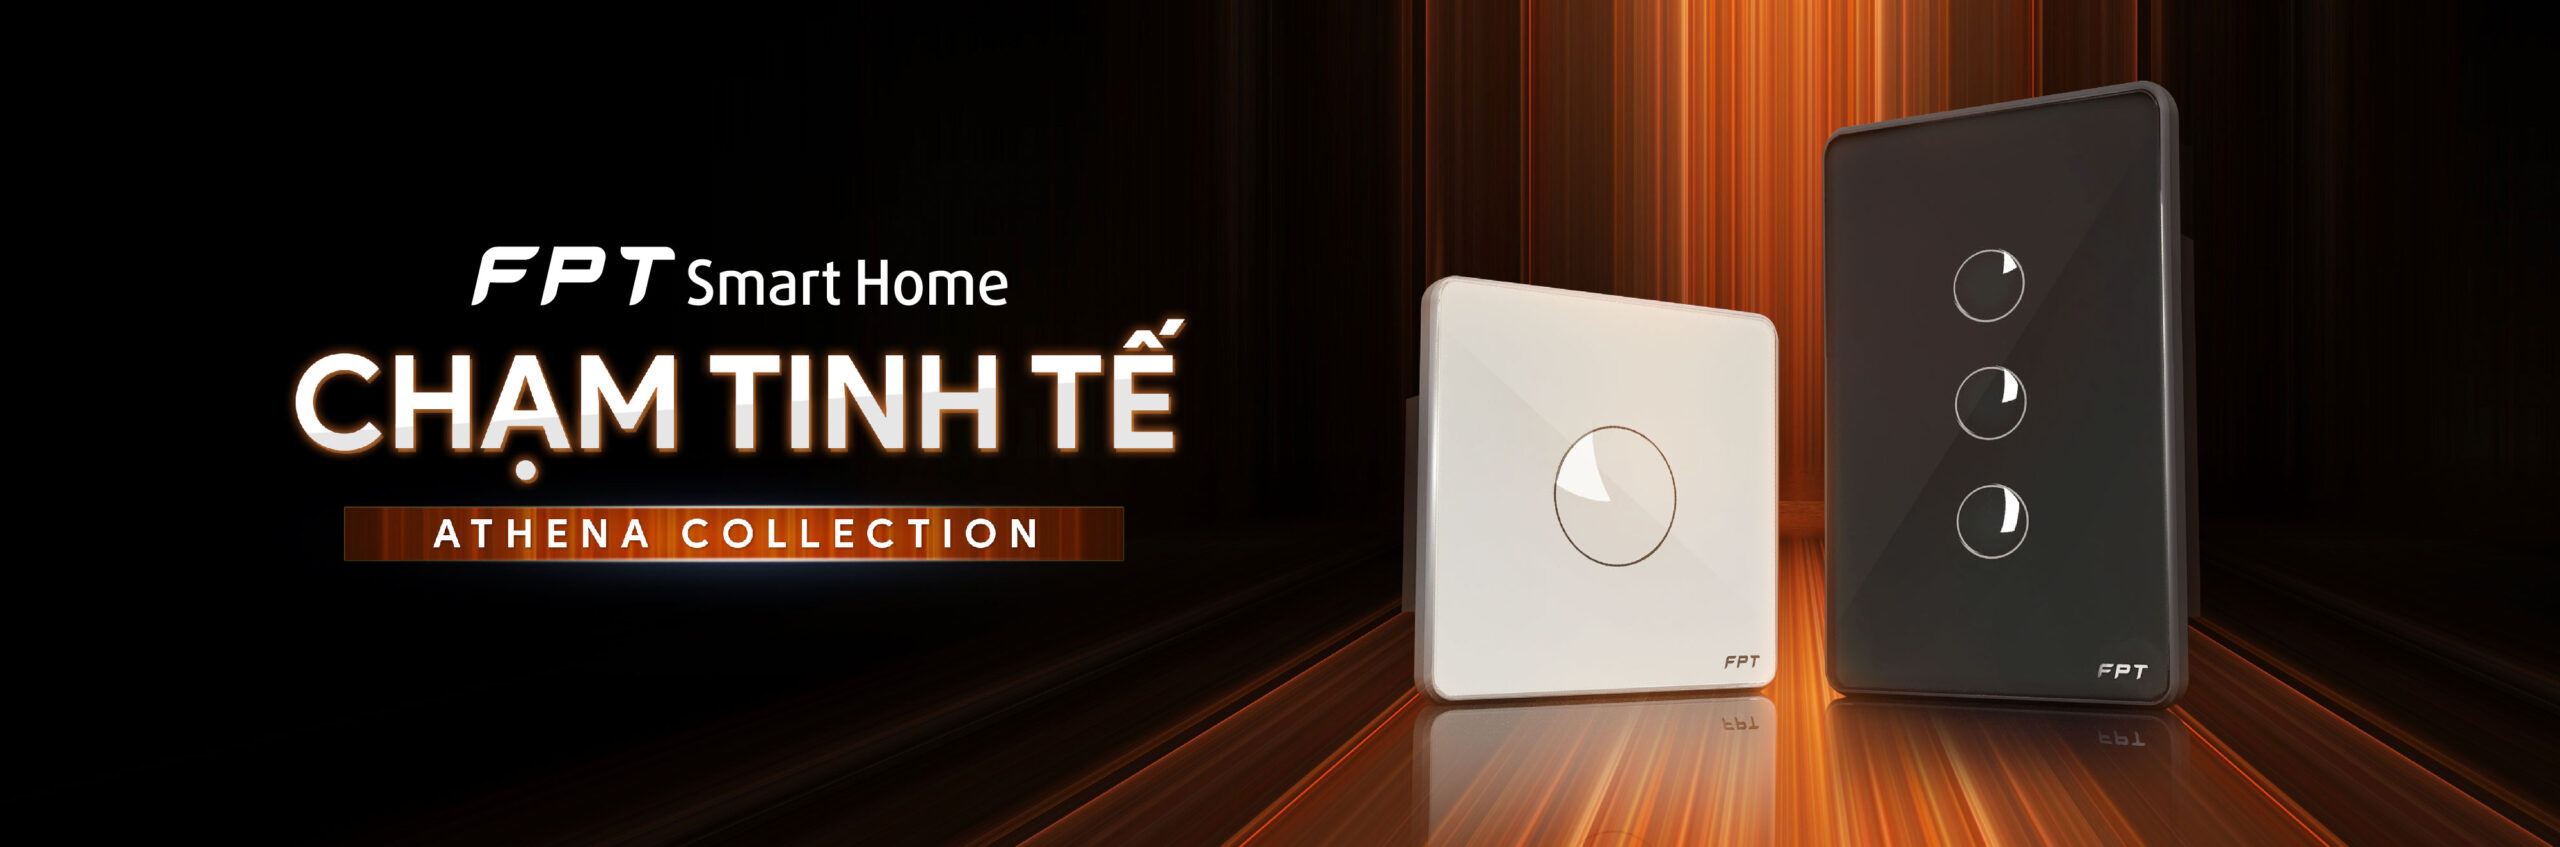 smarthome fpt online